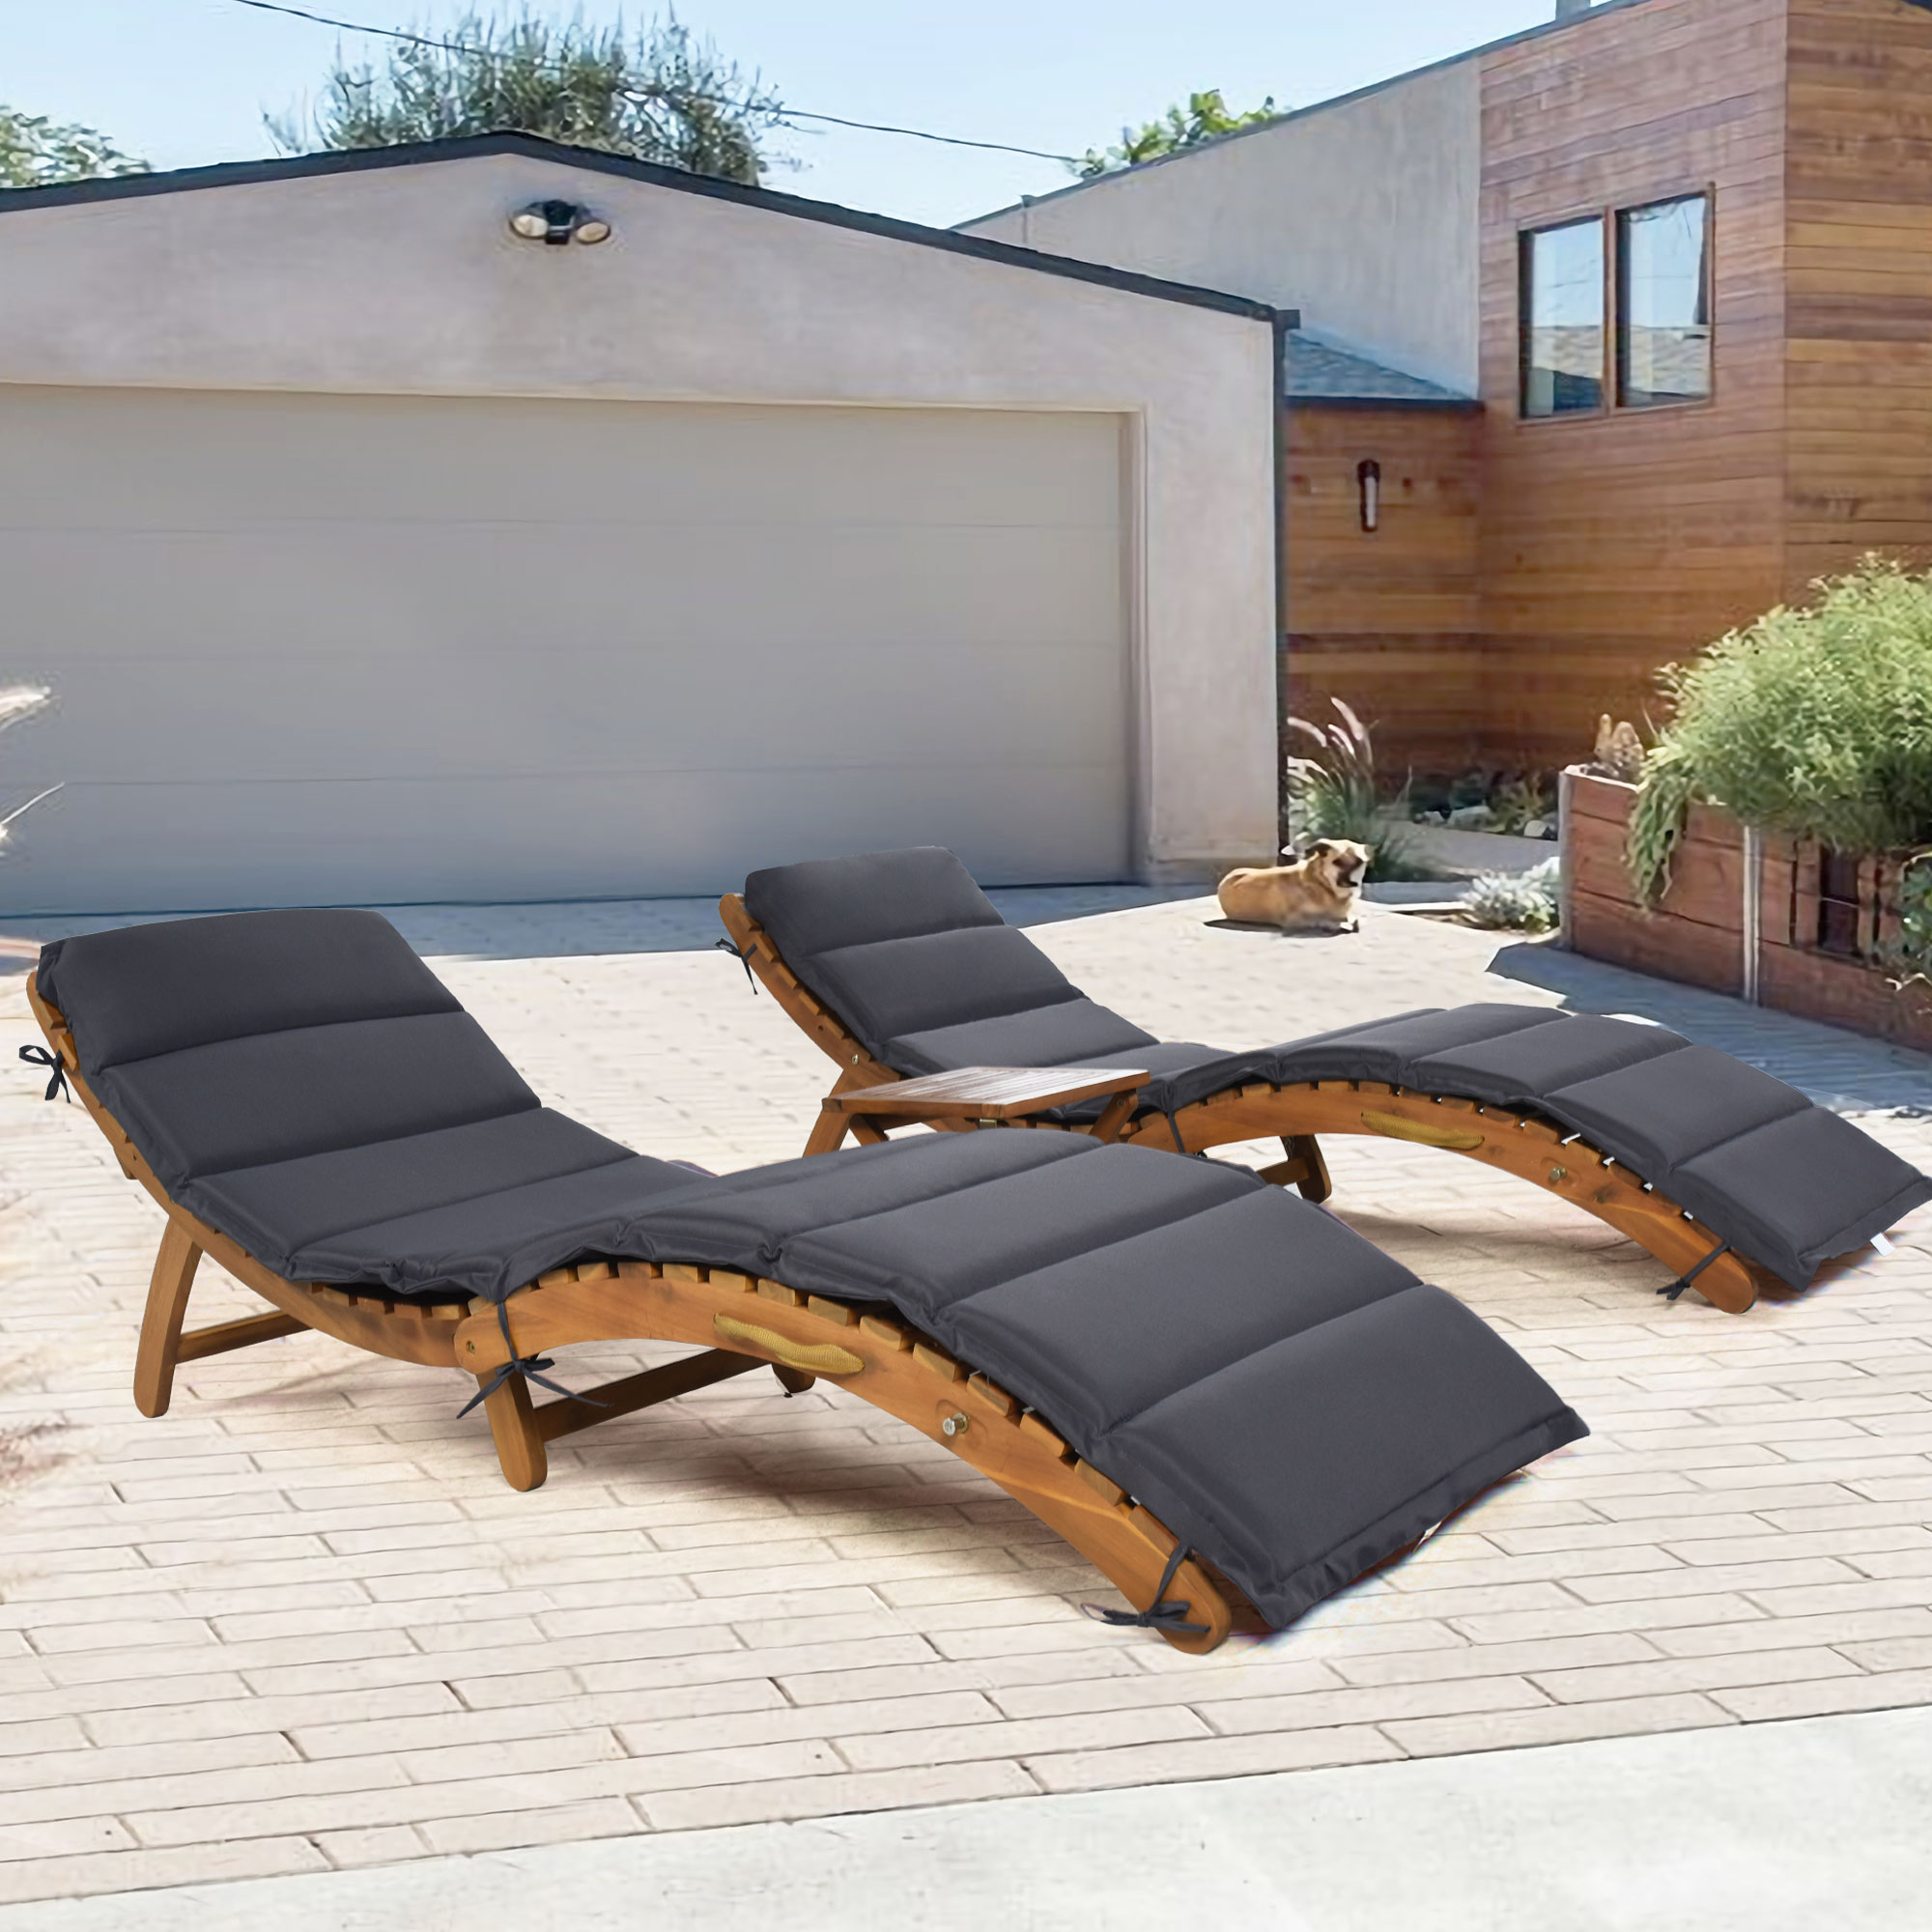 Outdoor Patio Wood Portable Extended Chaise Lounge Set with Foldable Tea Table for Balcony, Poolside, Garden, Brown Finish+Dark Gray Cushion-Boyel Living